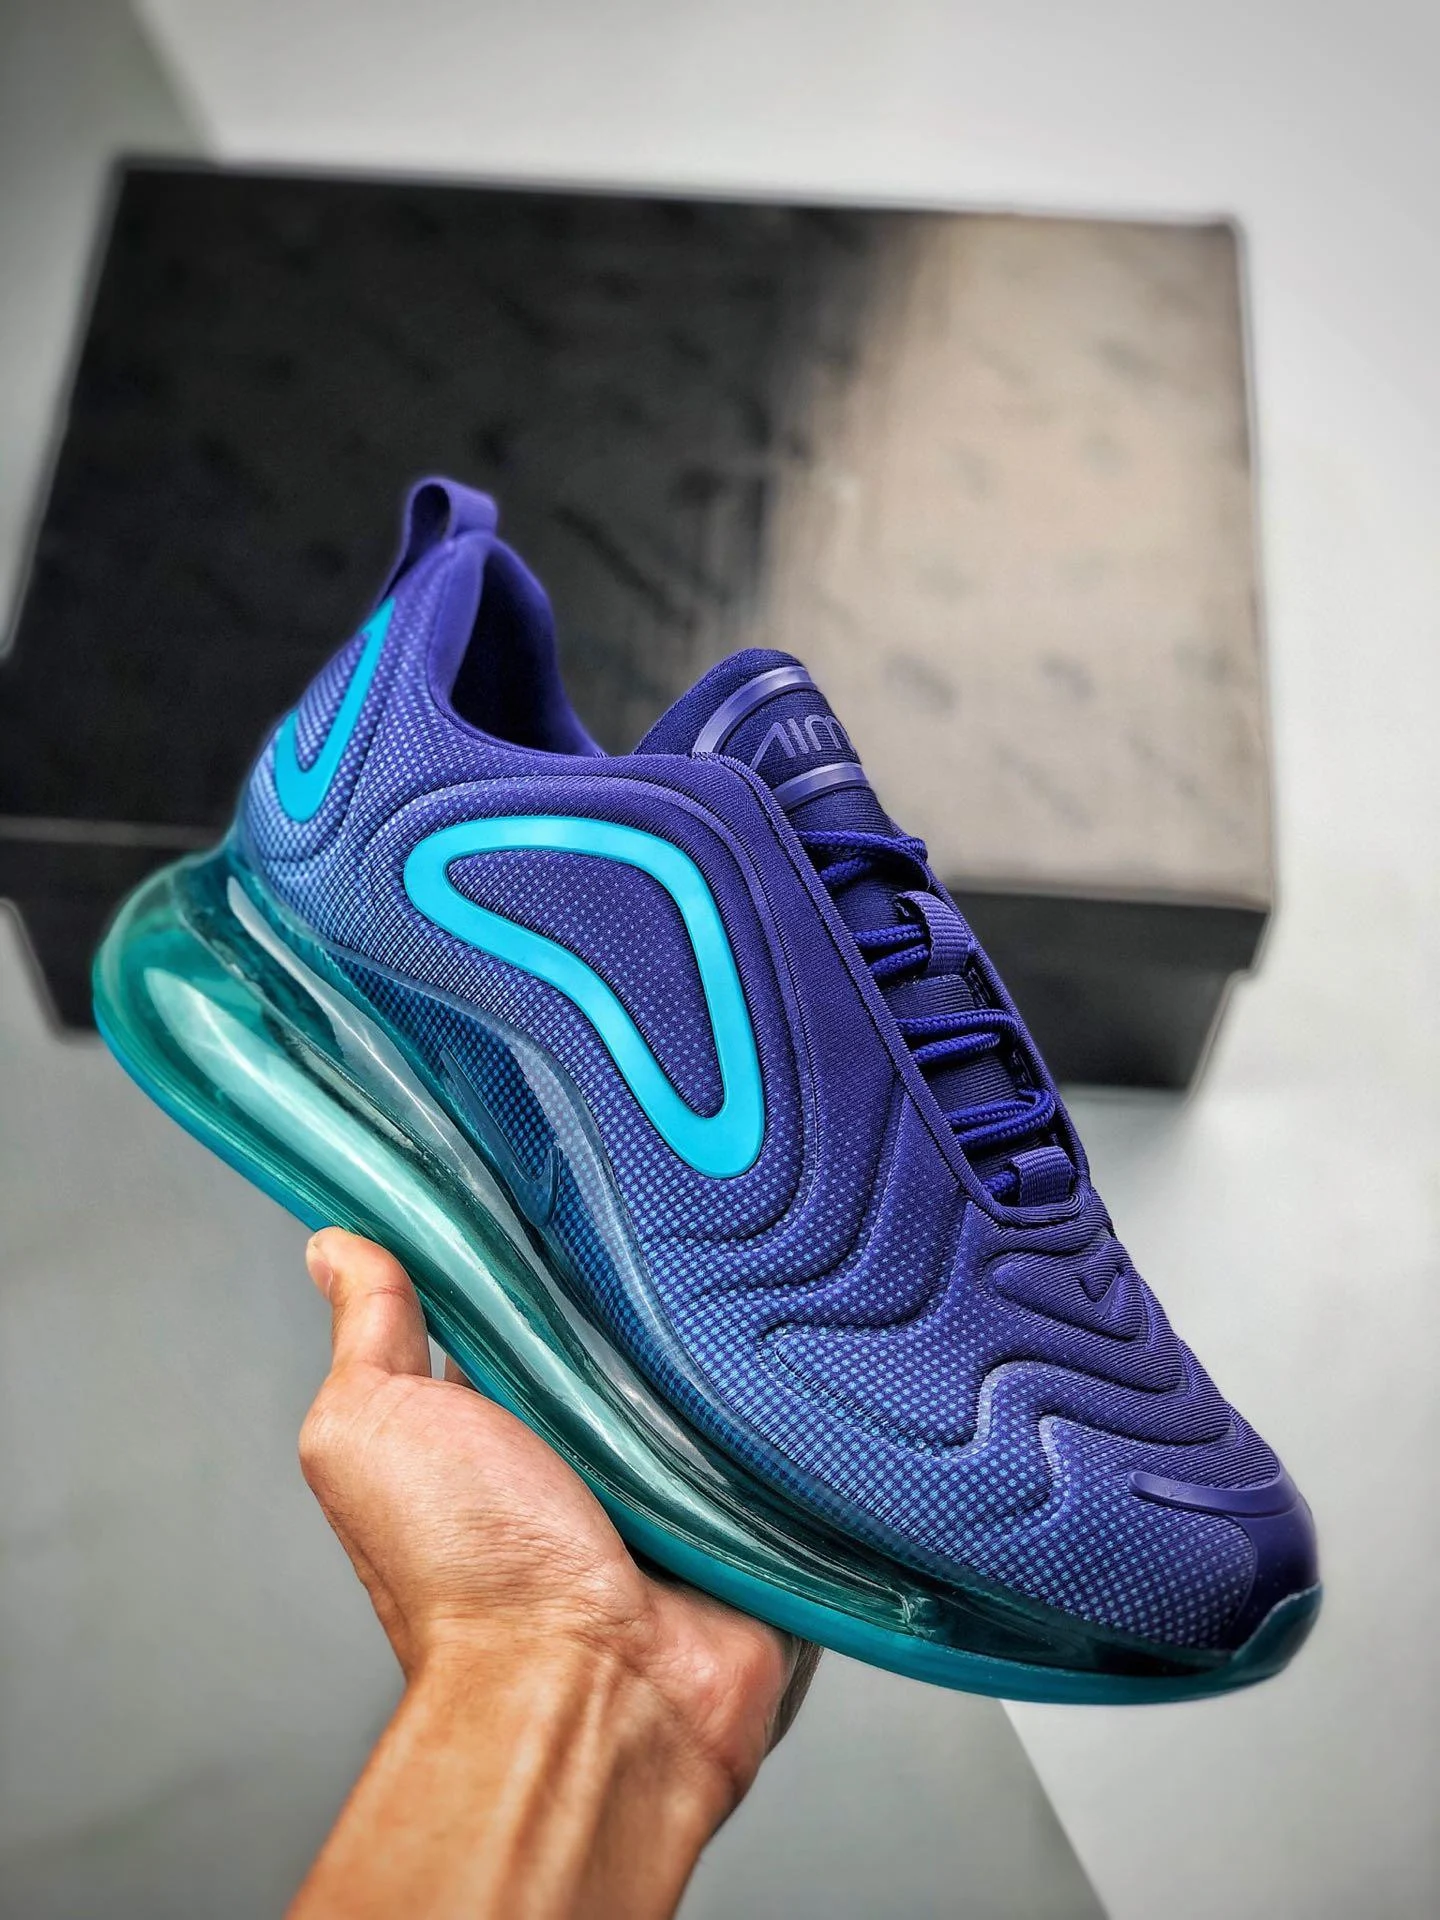 Nike Air Max 720 Nightshade AO2924-405 For Sale